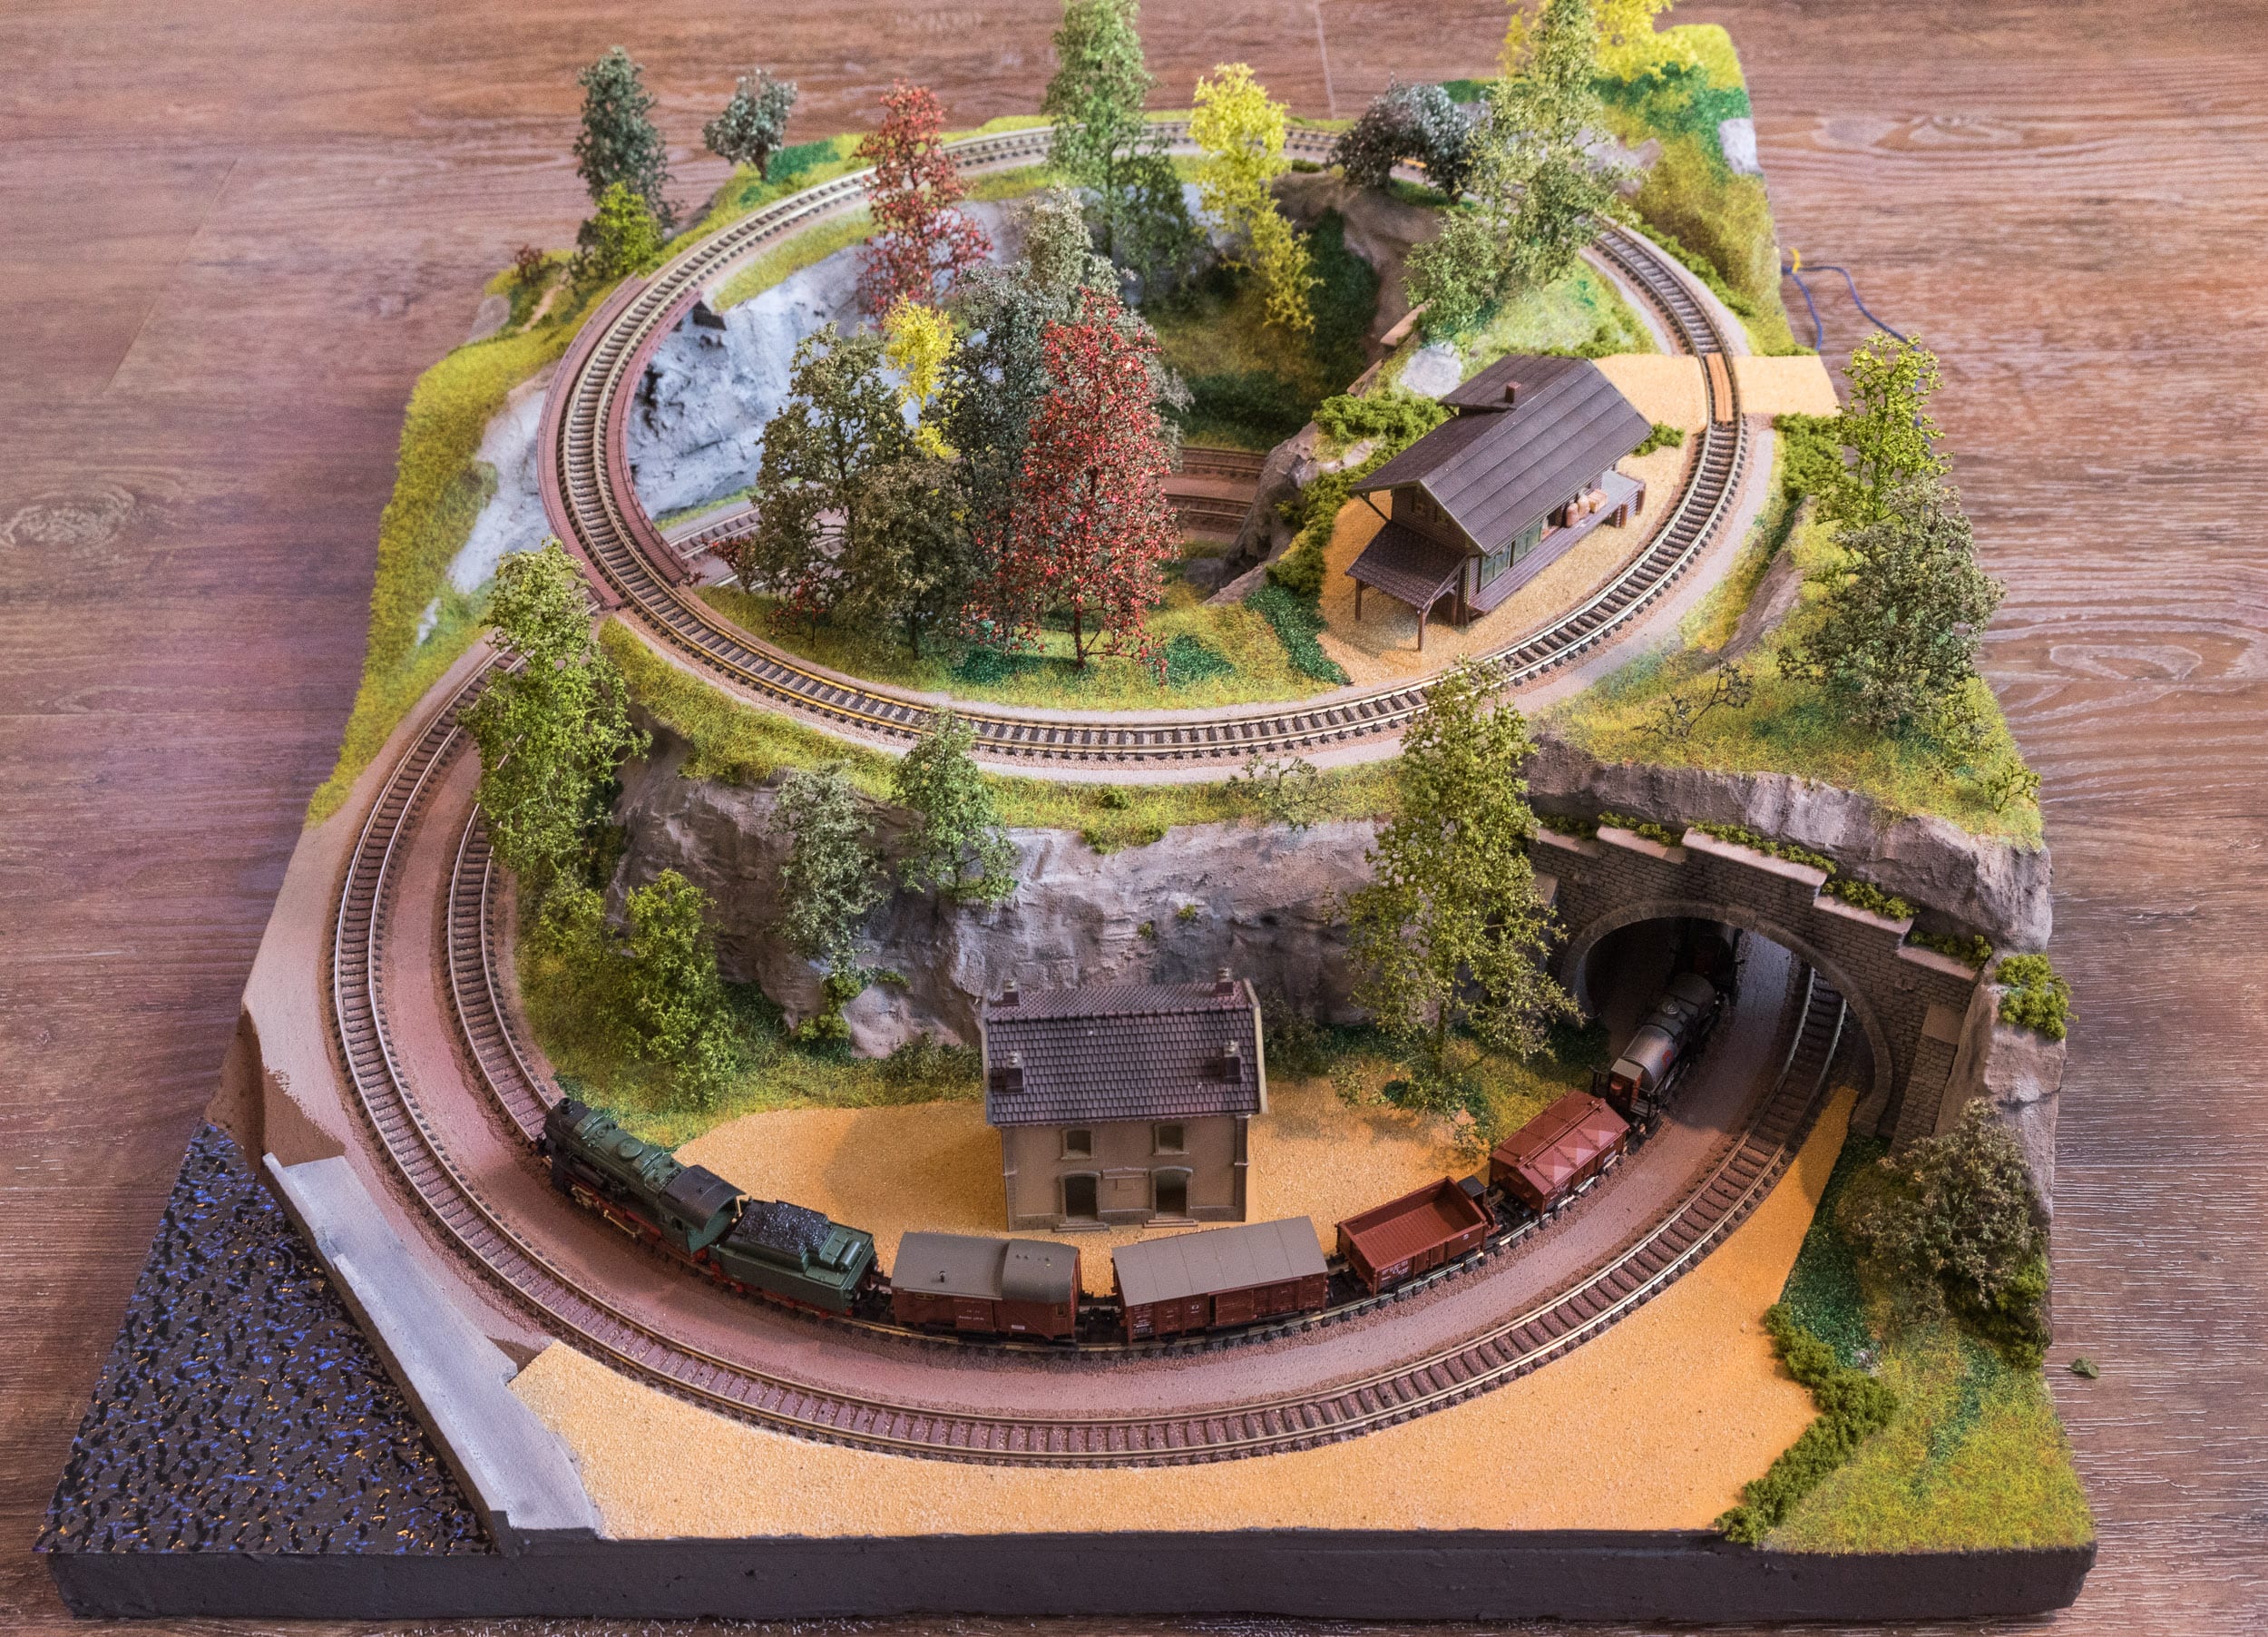 Small Z Scale Layout | peacecommission.kdsg.gov.ng